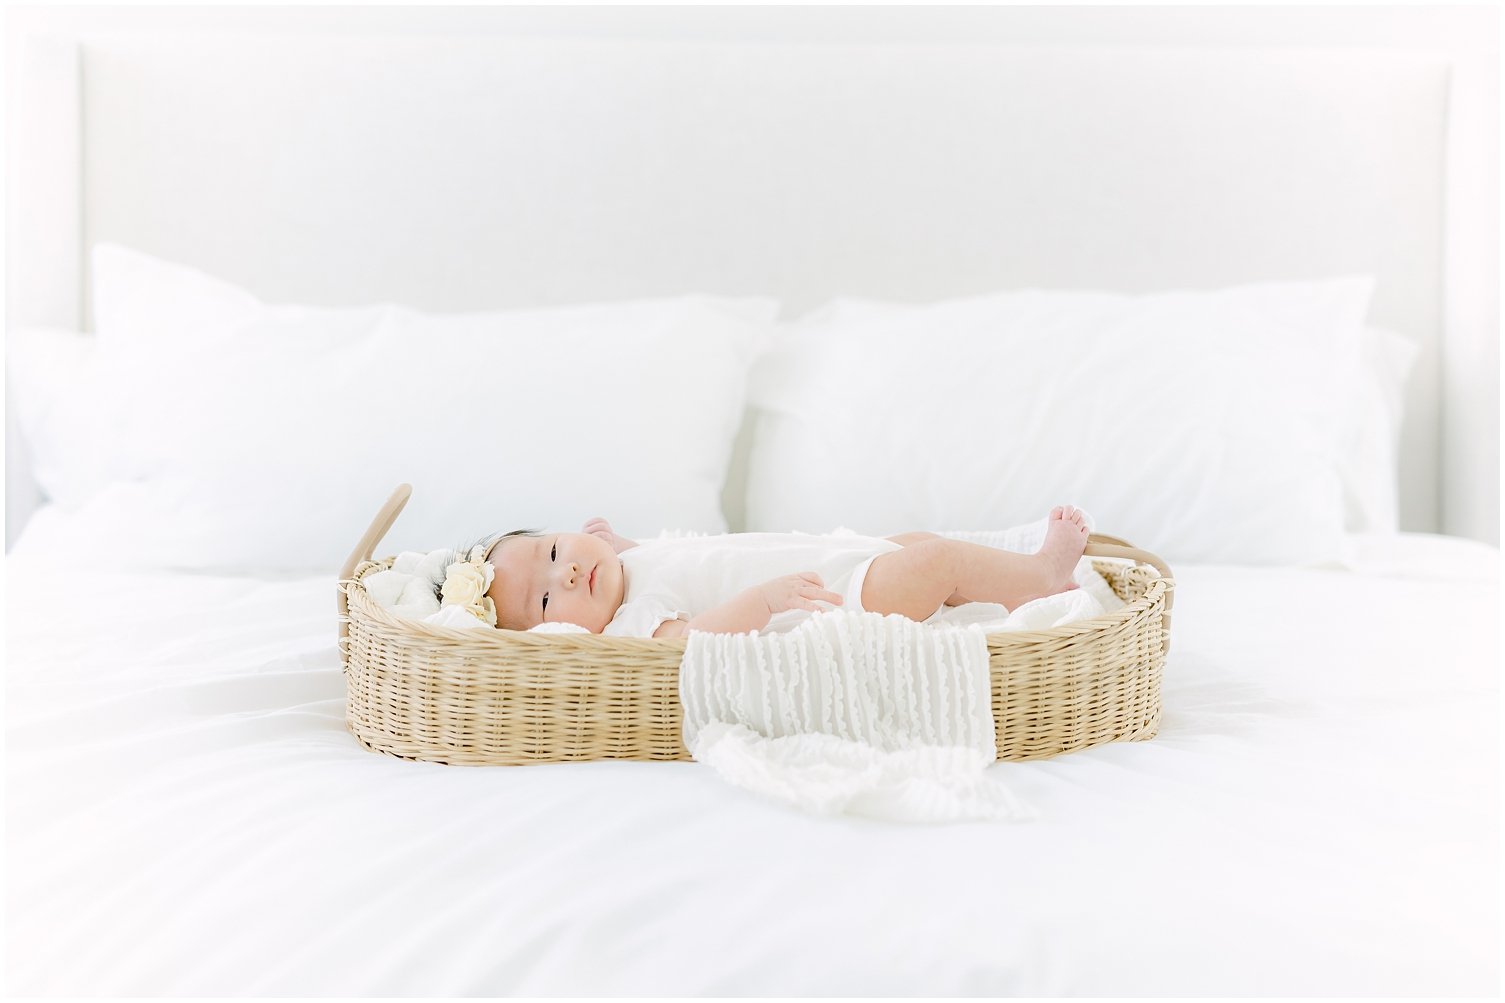 McCarter-In-Home-Newborn-Baby-Session-Los-Angeles-County_0003.jpg